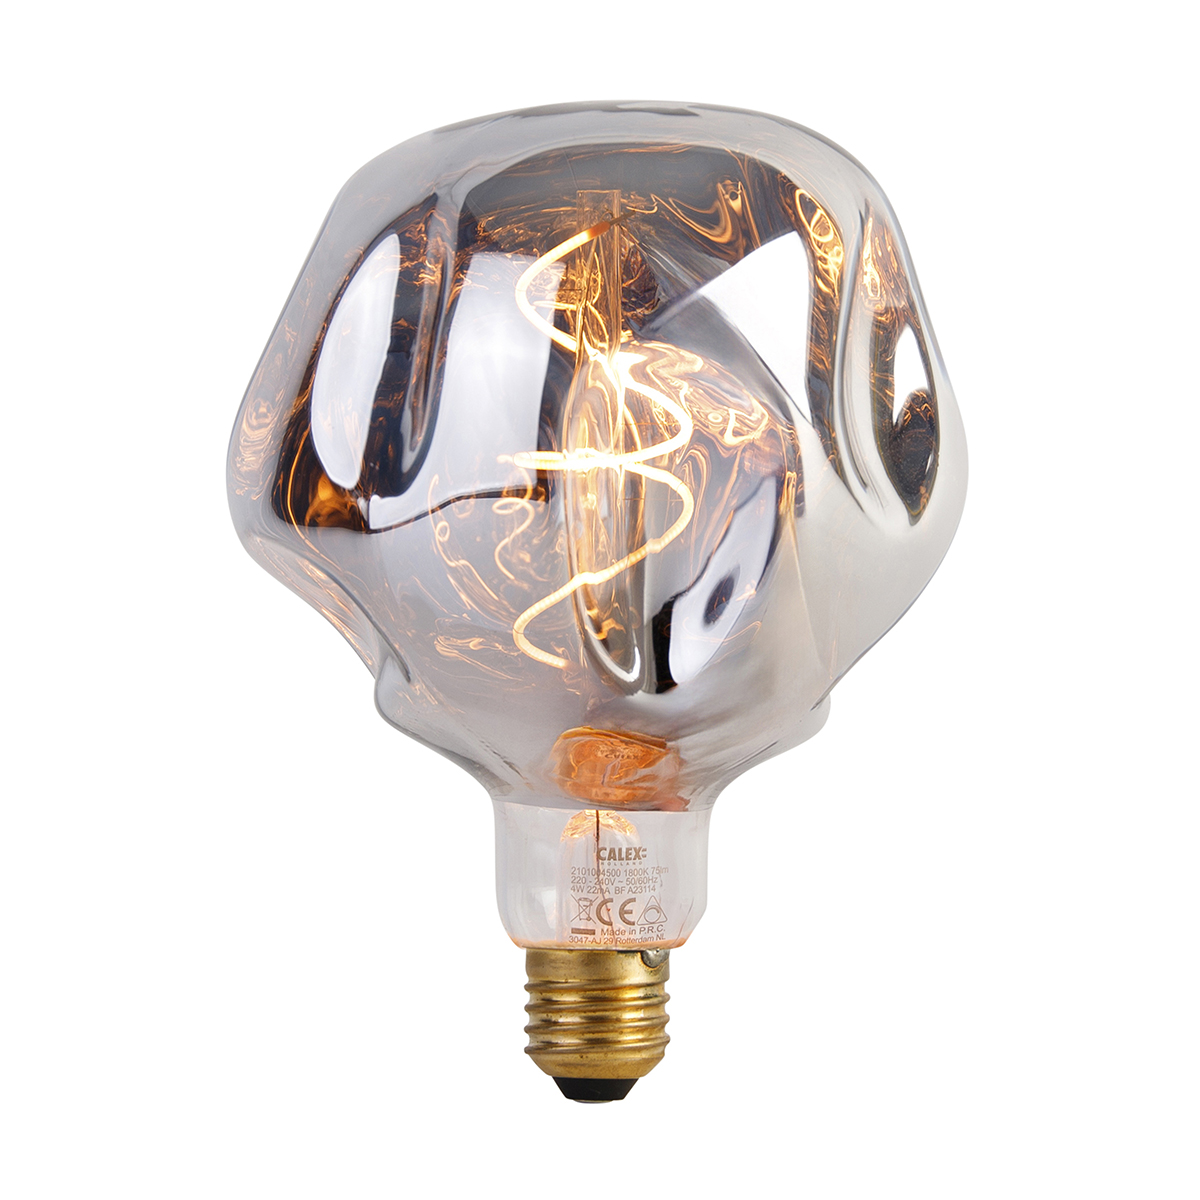 E27 dimmable LED lamp G125 silver 4W 75 lm 1800K